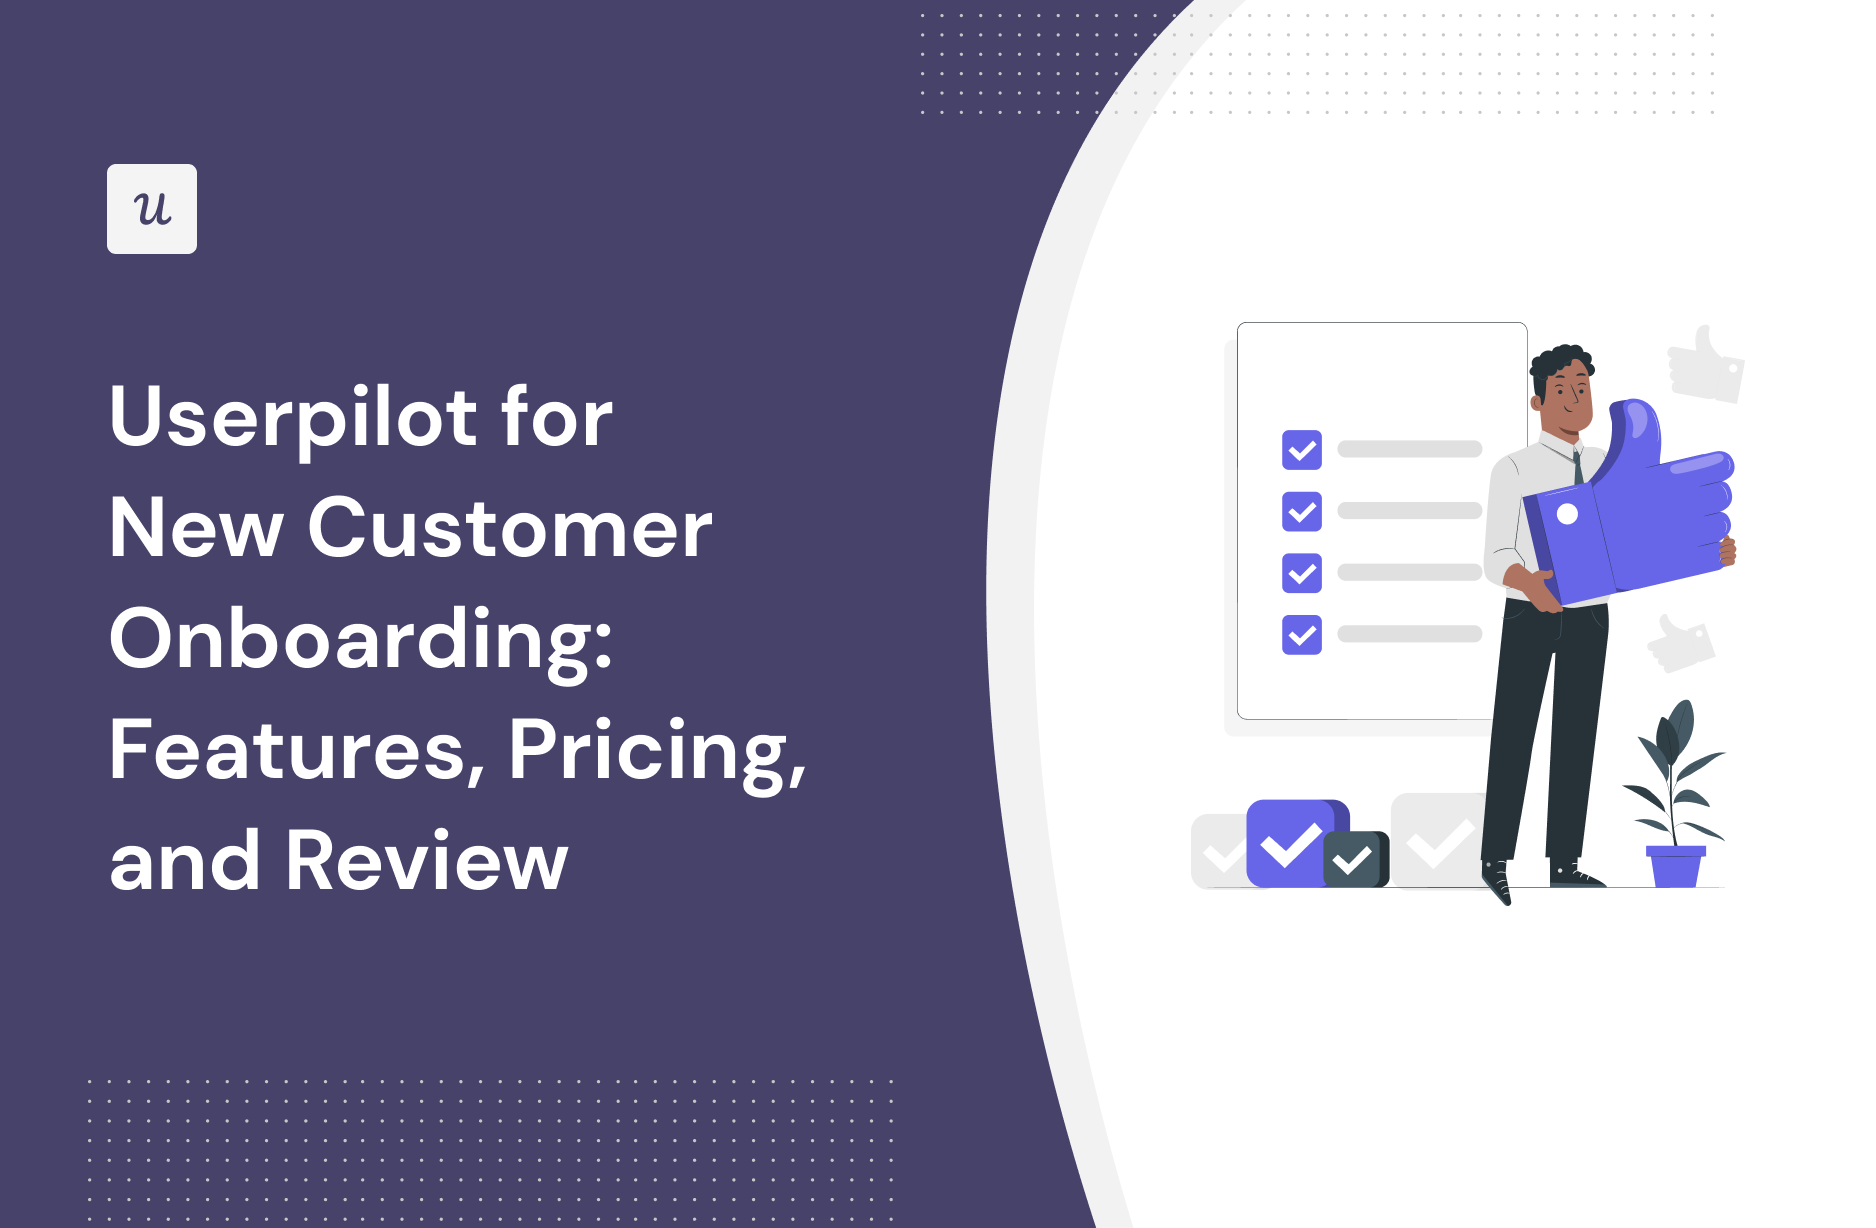 Userpilot for New Customer Onboarding: Features, Pricing, and Review